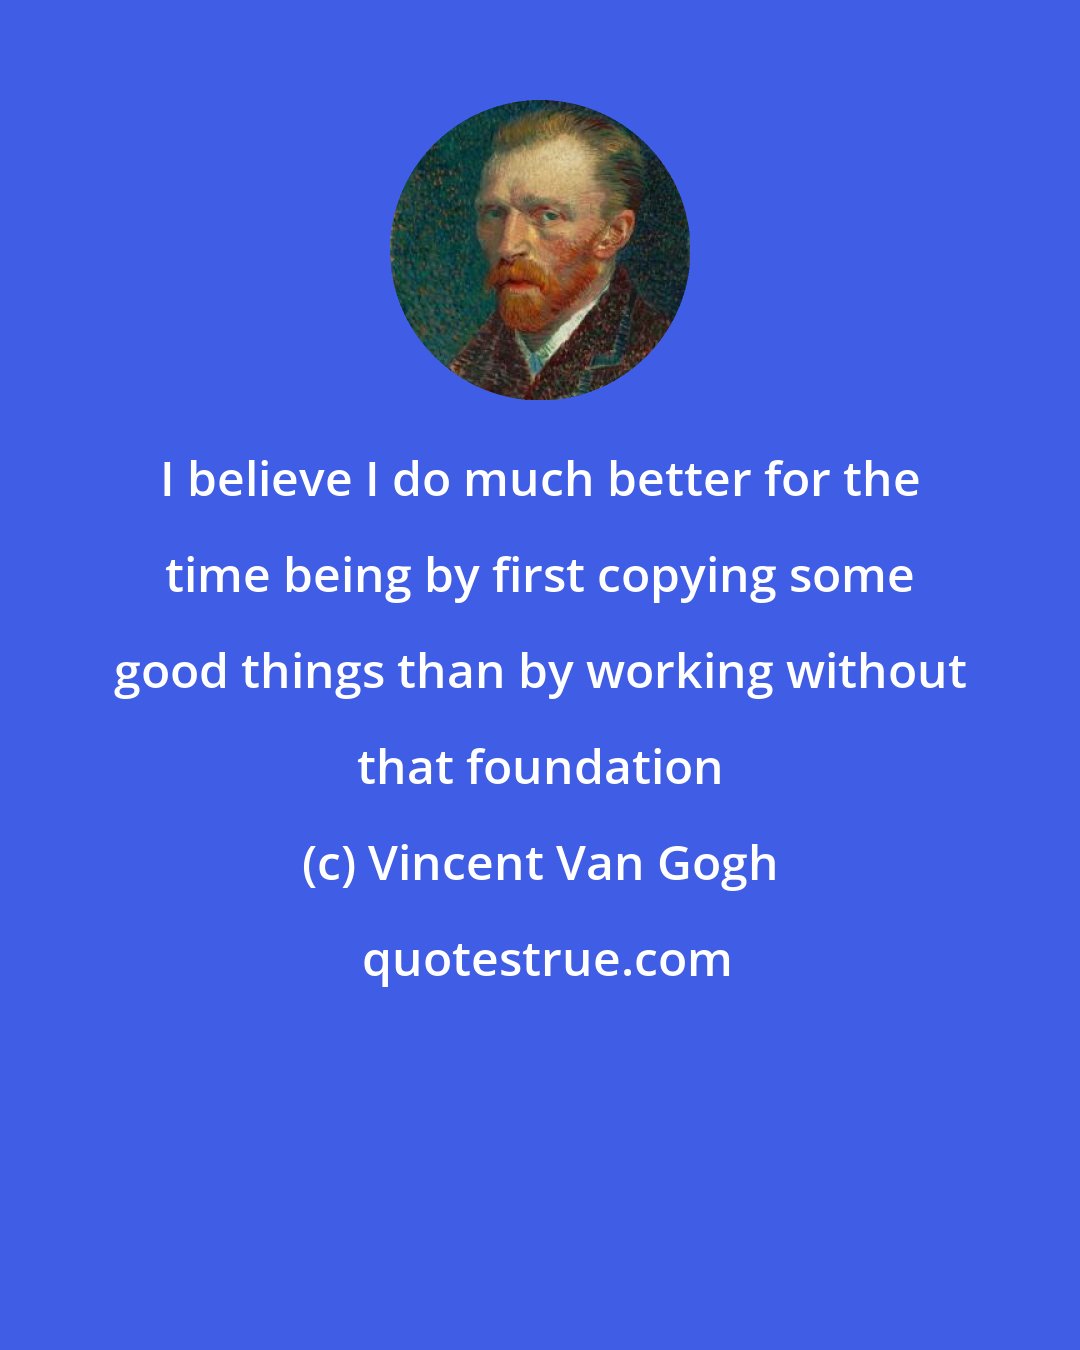 Vincent Van Gogh: I believe I do much better for the time being by first copying some good things than by working without that foundation